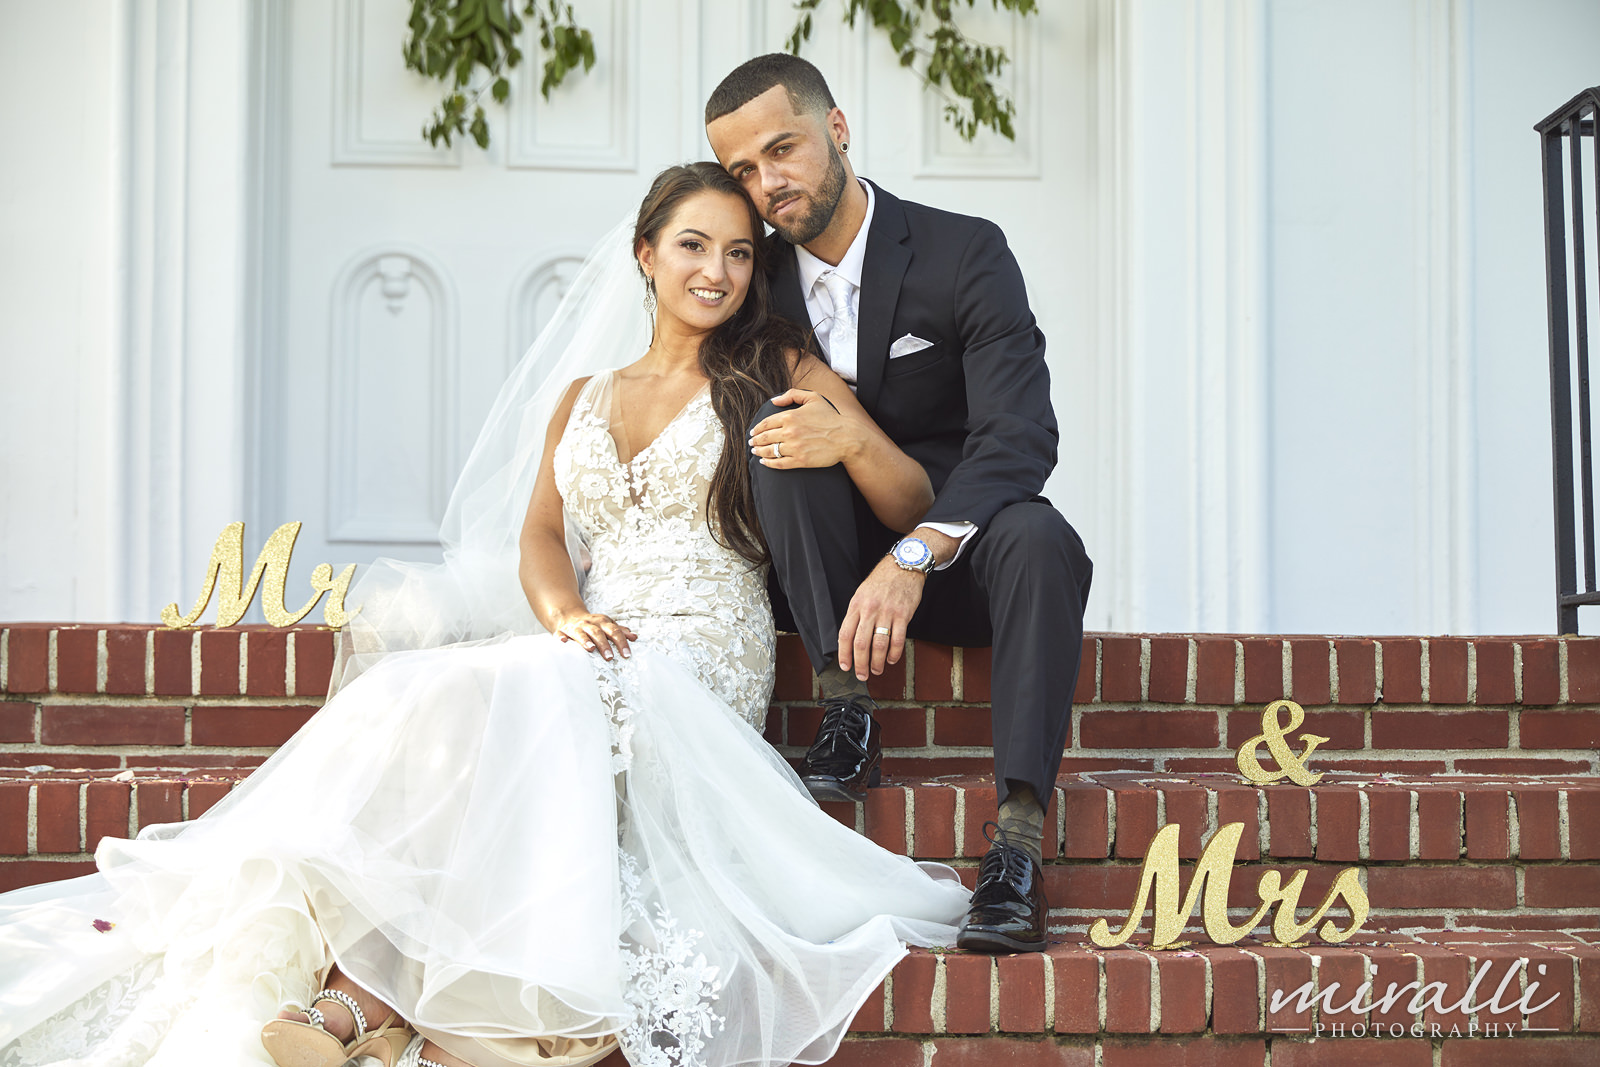 Watermill Caterers Wedding Photos by Miralli Photography